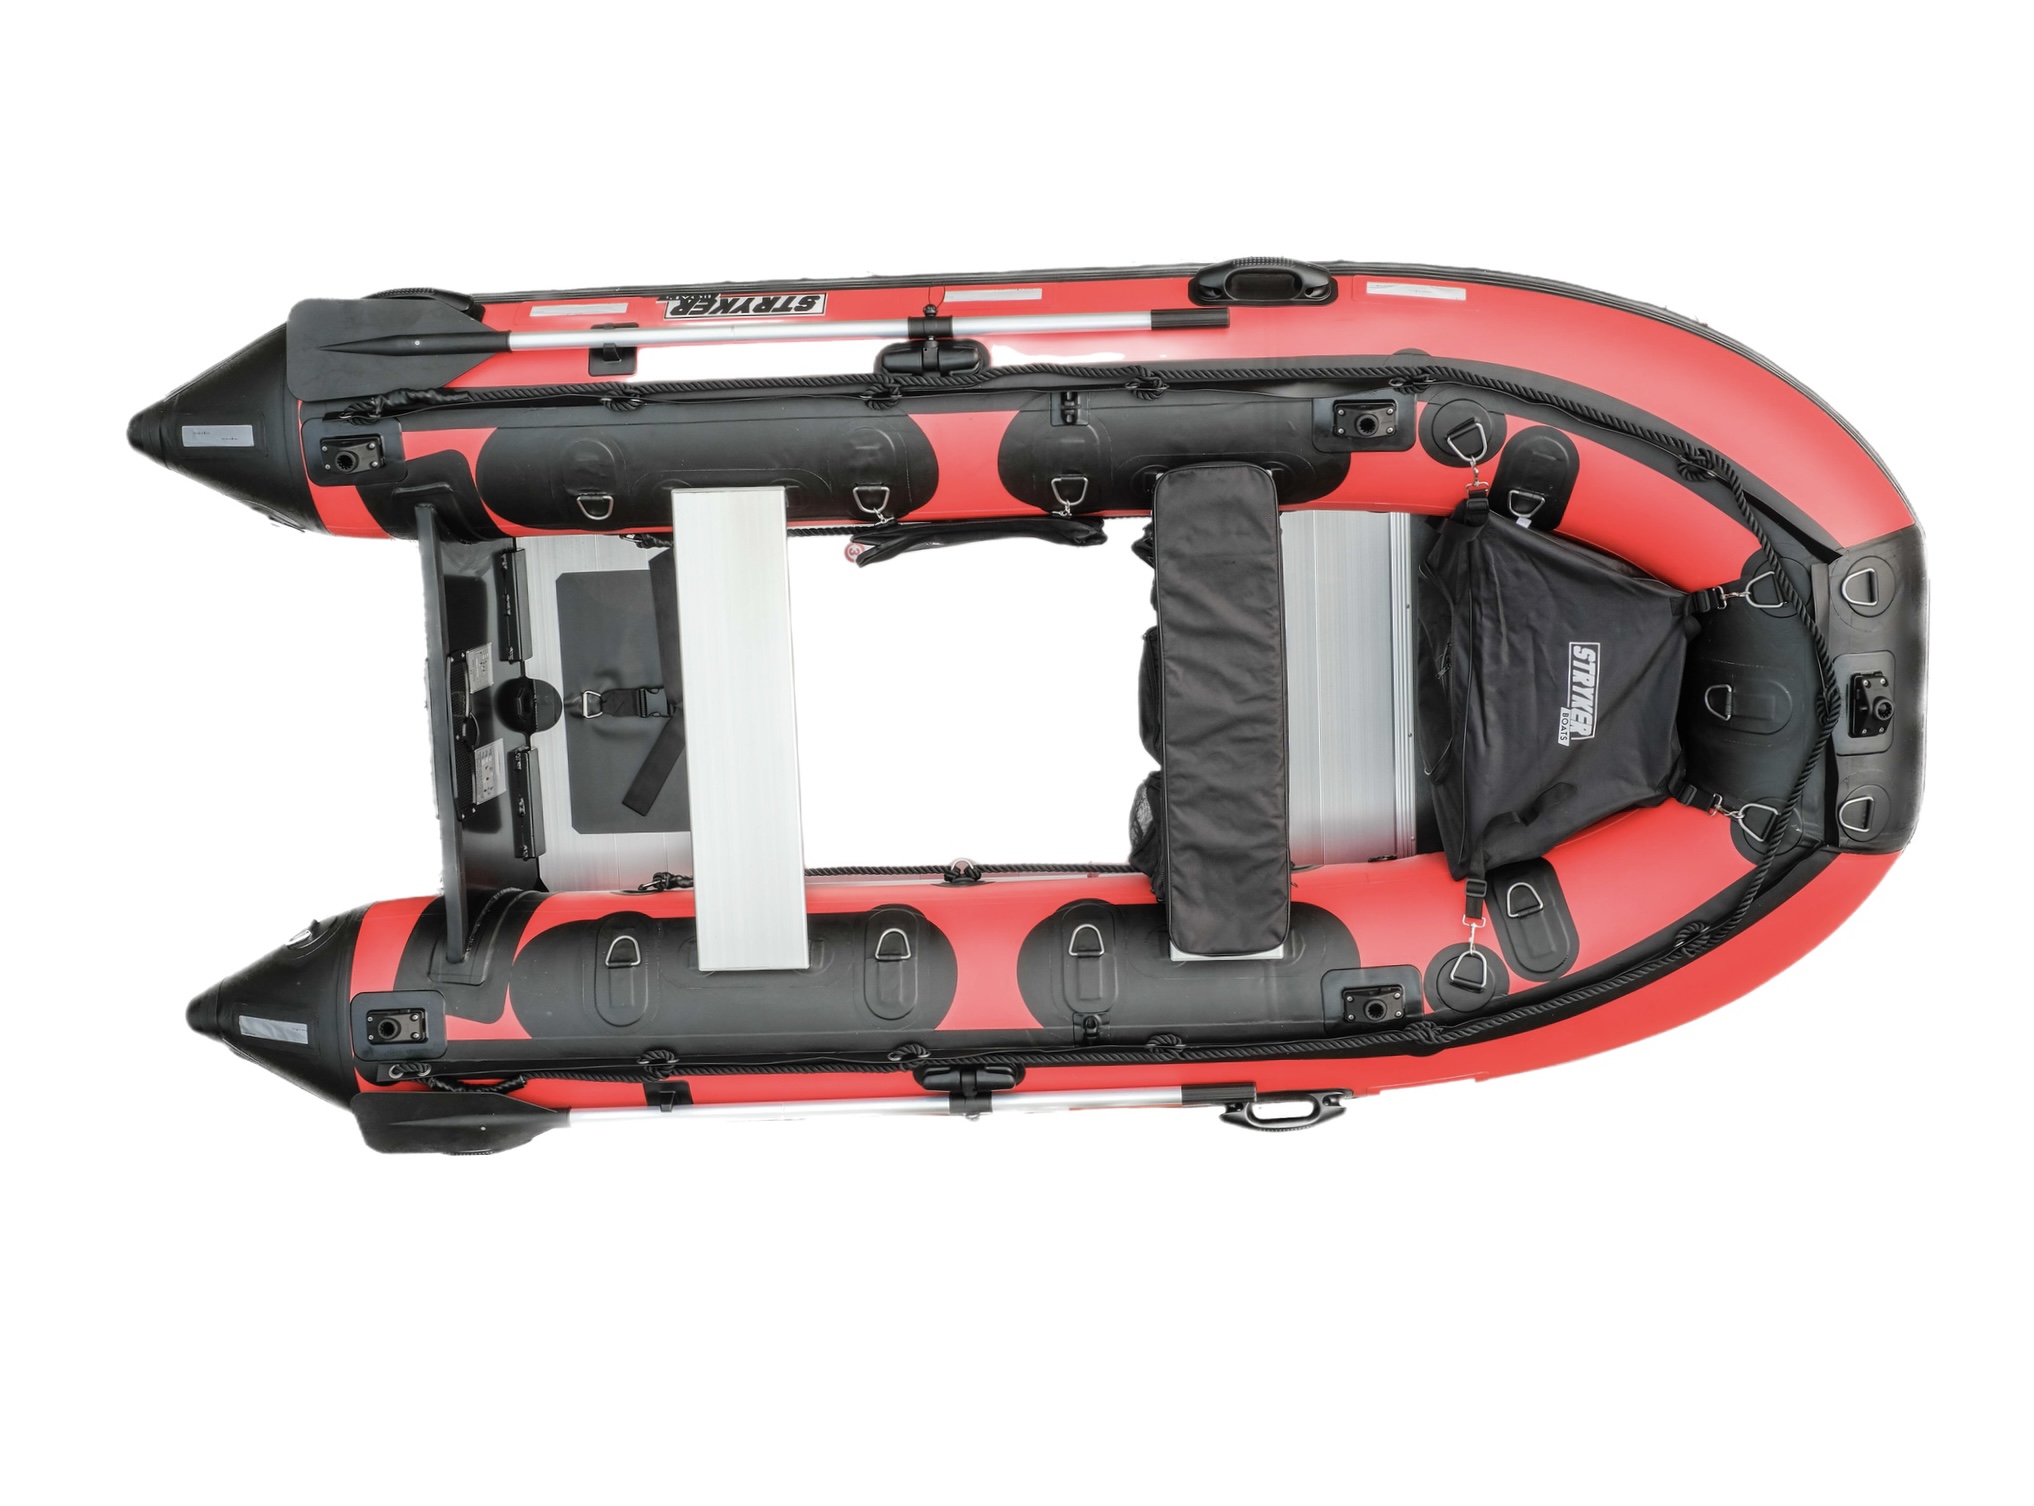 Stryker LX 360 (11’ 7”) Inflatable Boat